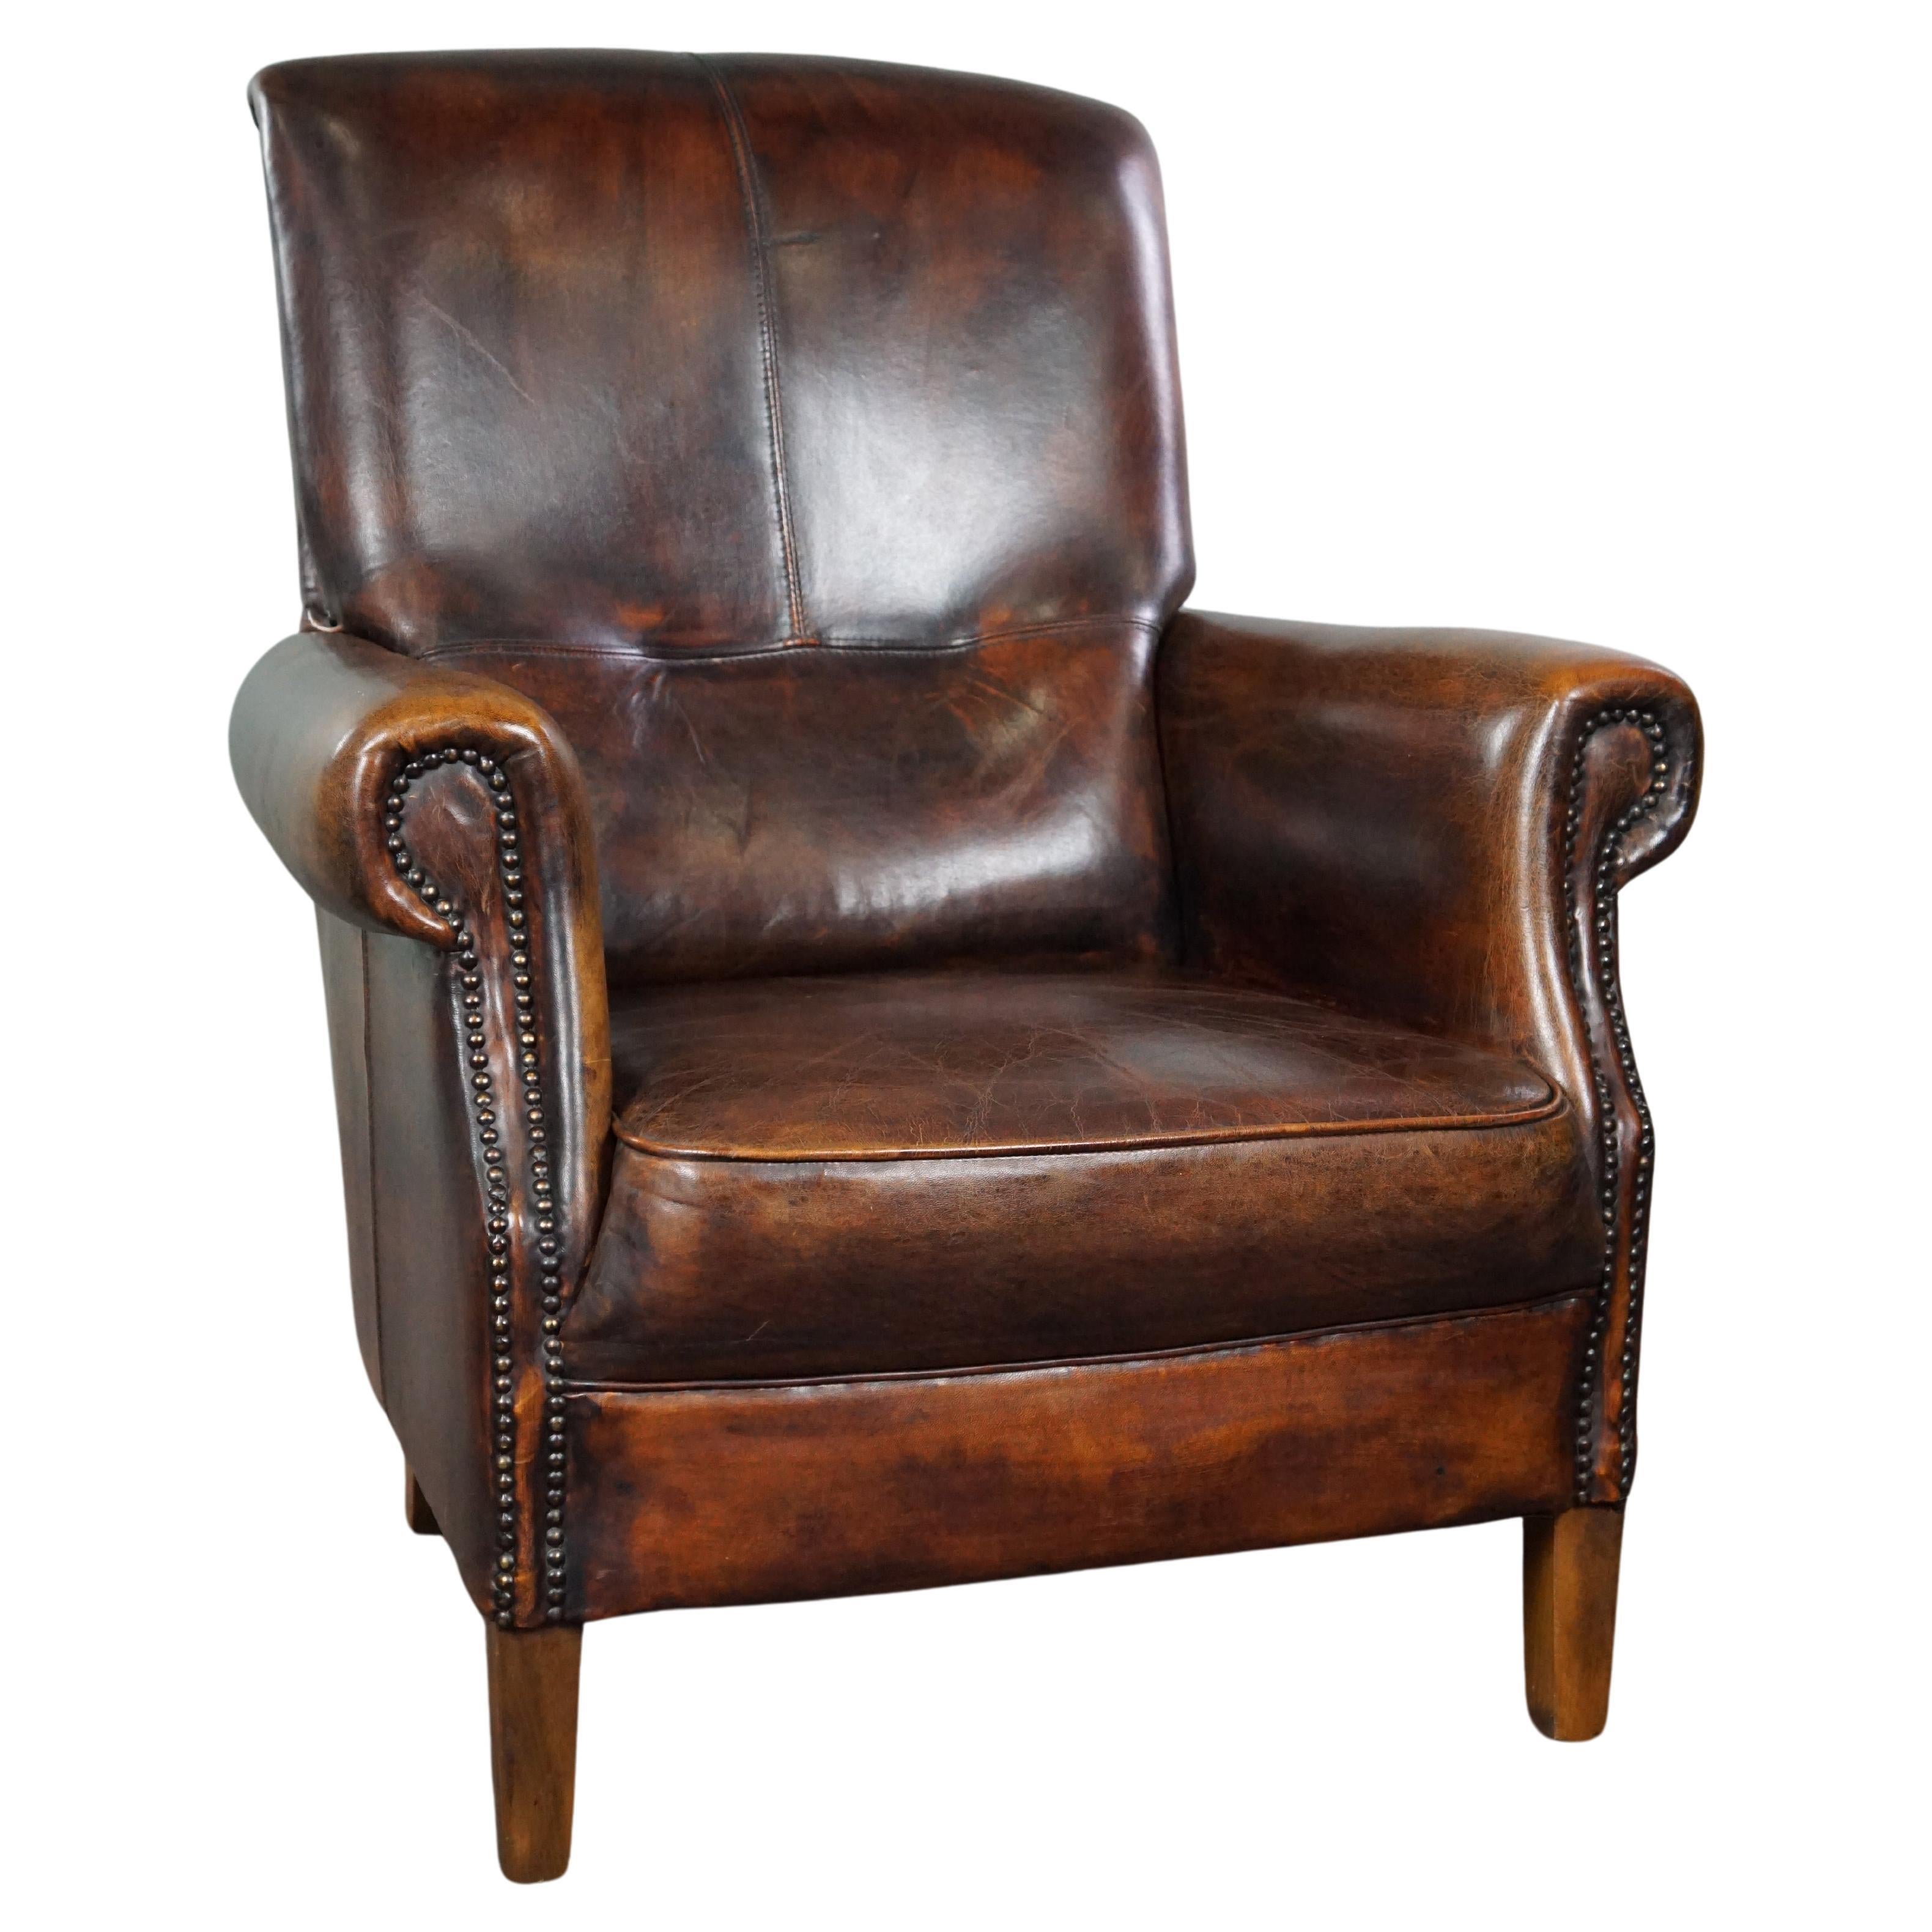 Stately sheep leather armchair, comfortable seat, and high back